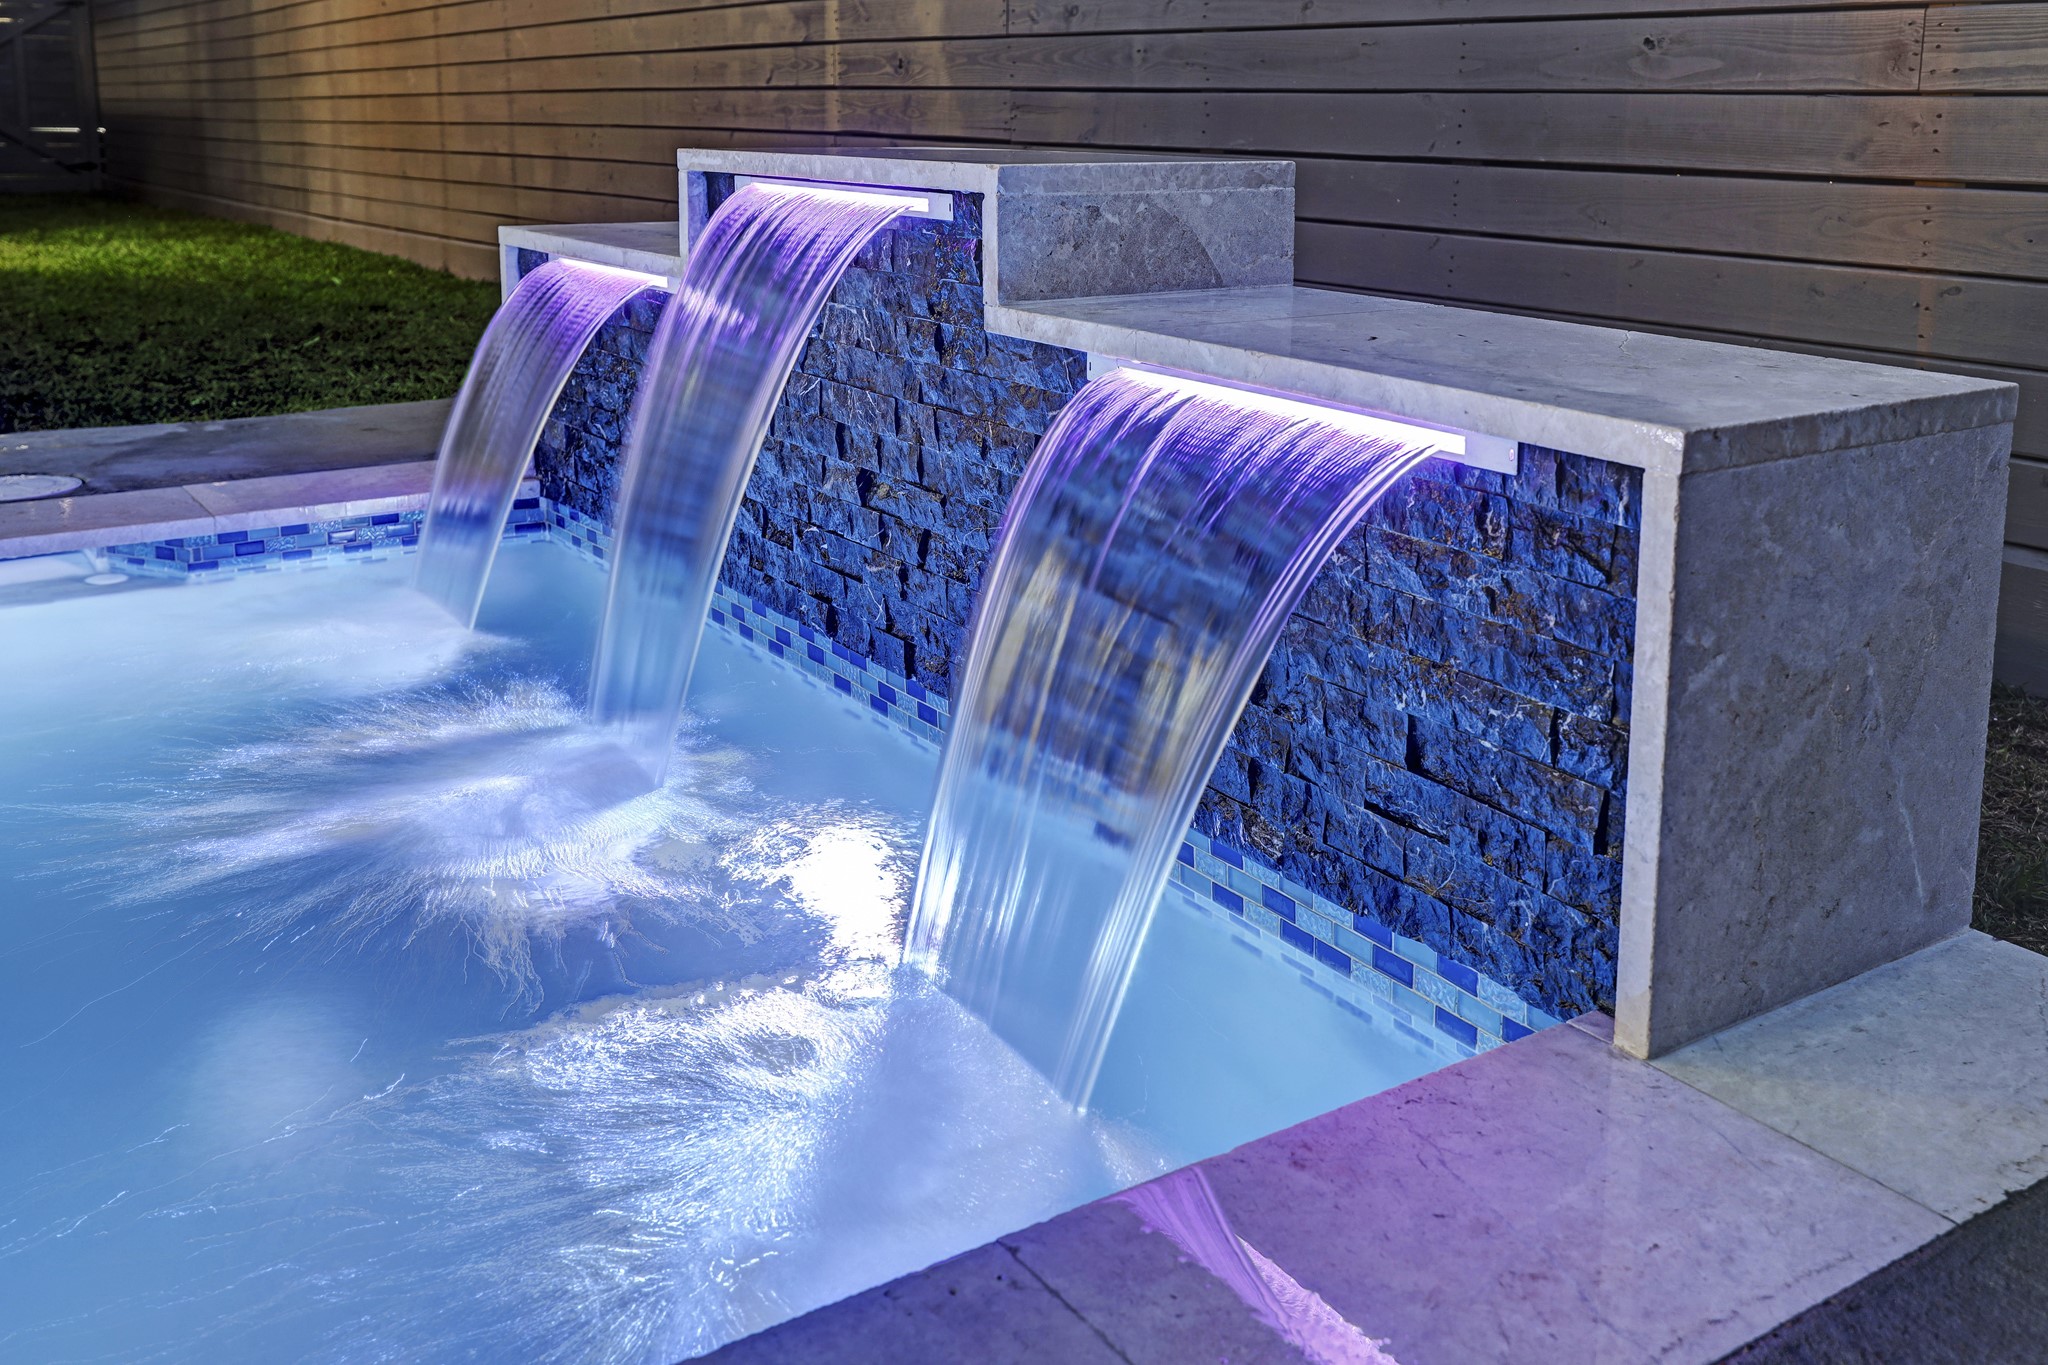 You'll enjoy the beautiful dipping pool with water features that add soothing sounds to the space.